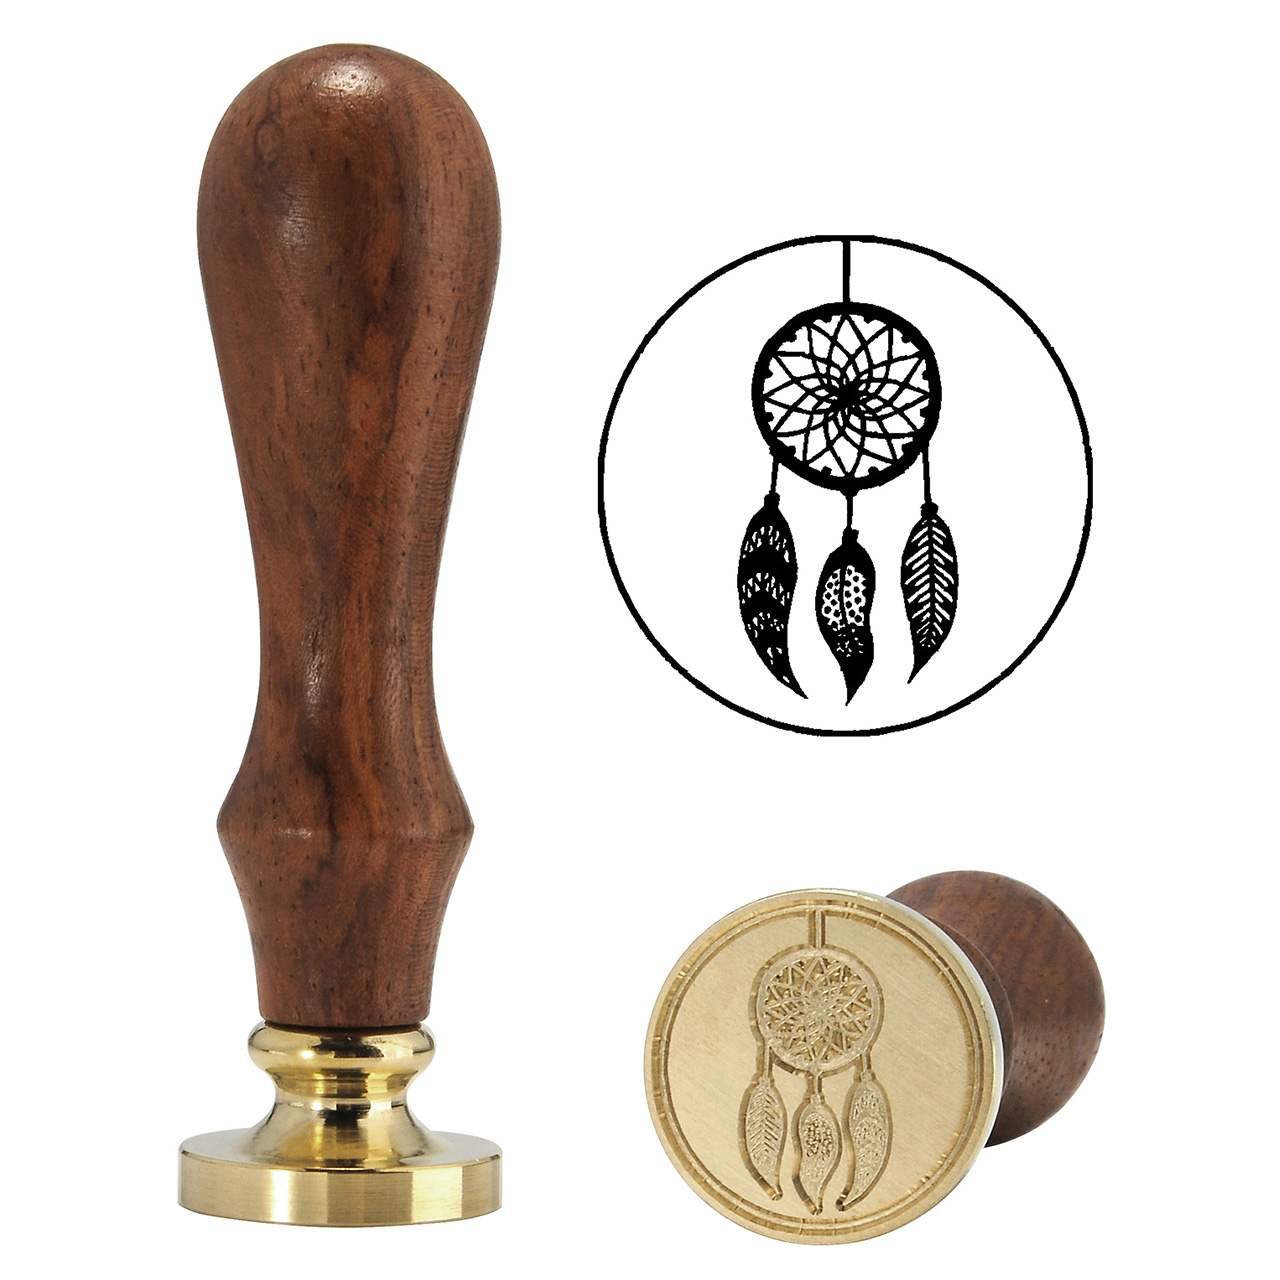 Dream Catcher Wax Stamp, Yoption Vintage Retro Dream Catcher Sealing Wax Seal Stamp, Great for Embellishment of Cards Envelopes, Invitations, Wine Packages, Gift Idea (Dream Catcher) 